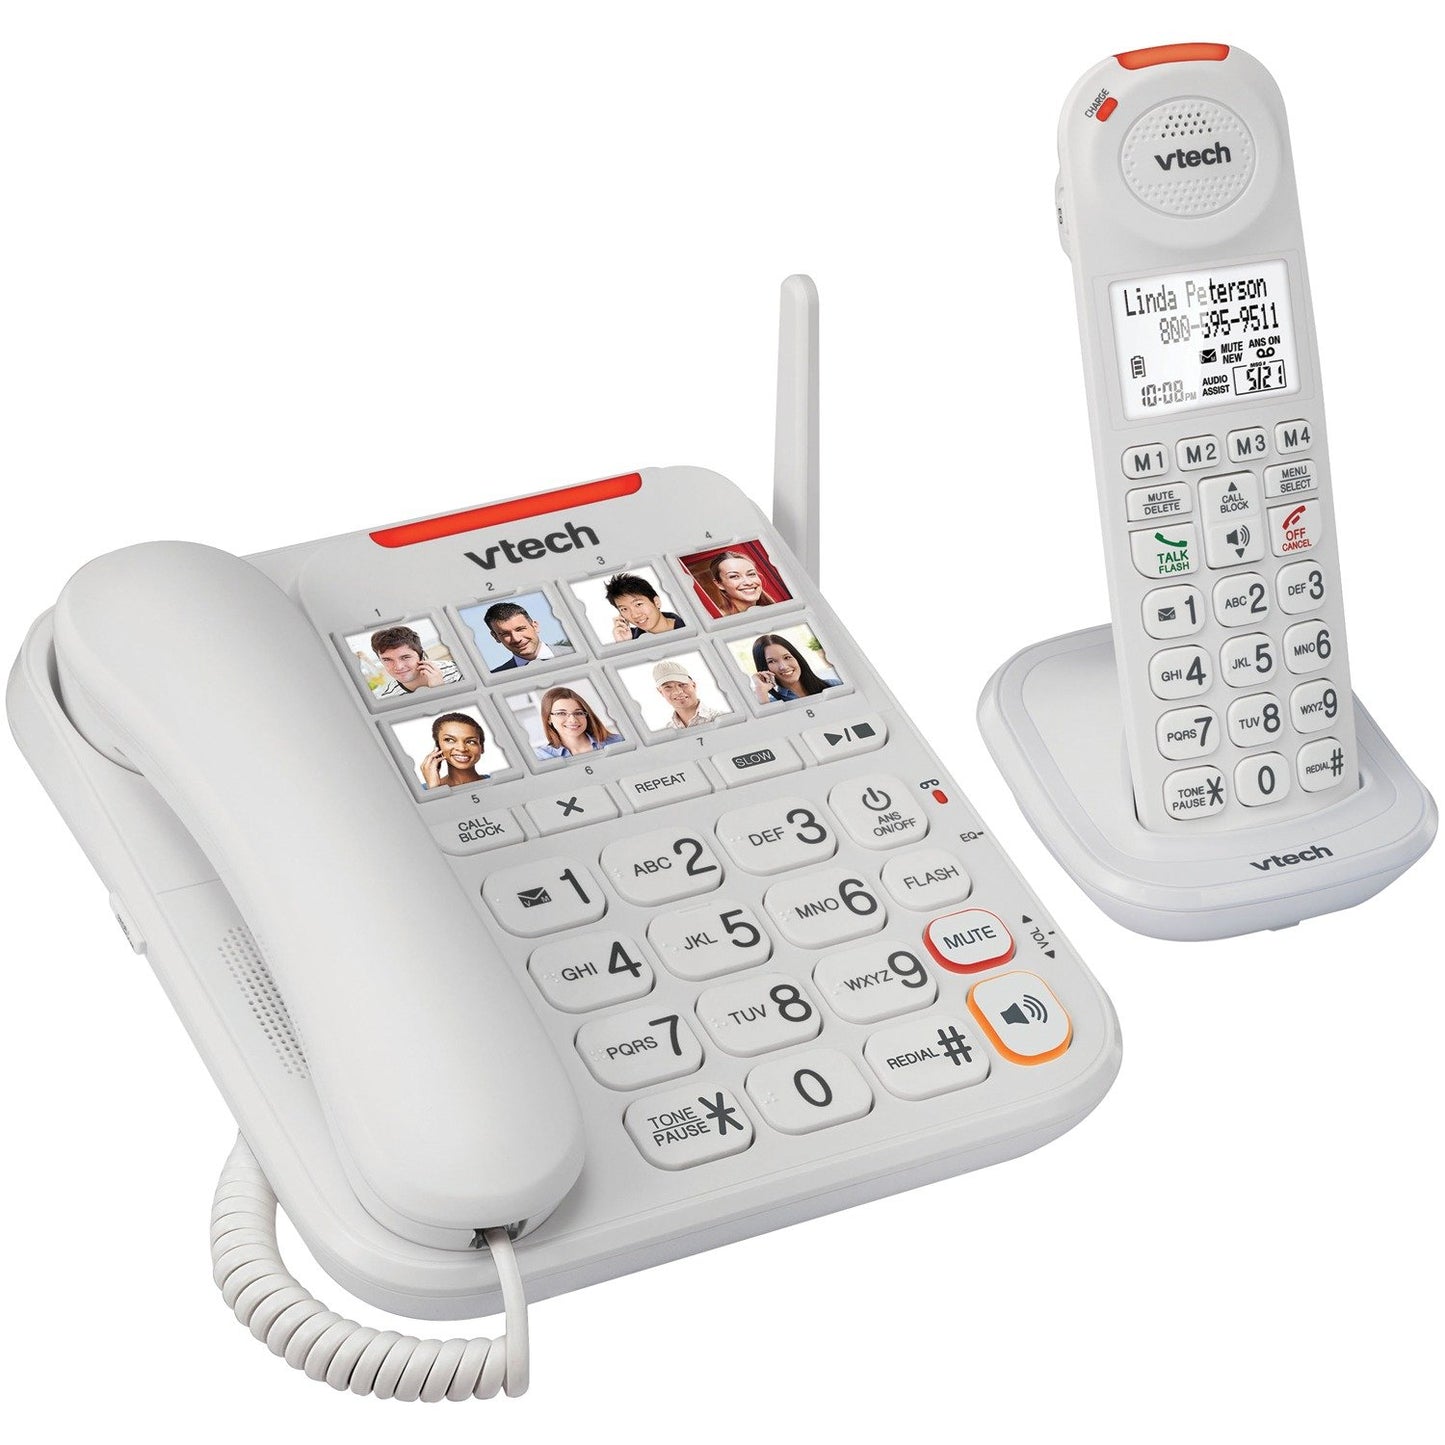 VTech VTSN5147 Amplified Corded/Cordless Answering System w/Big Buttons